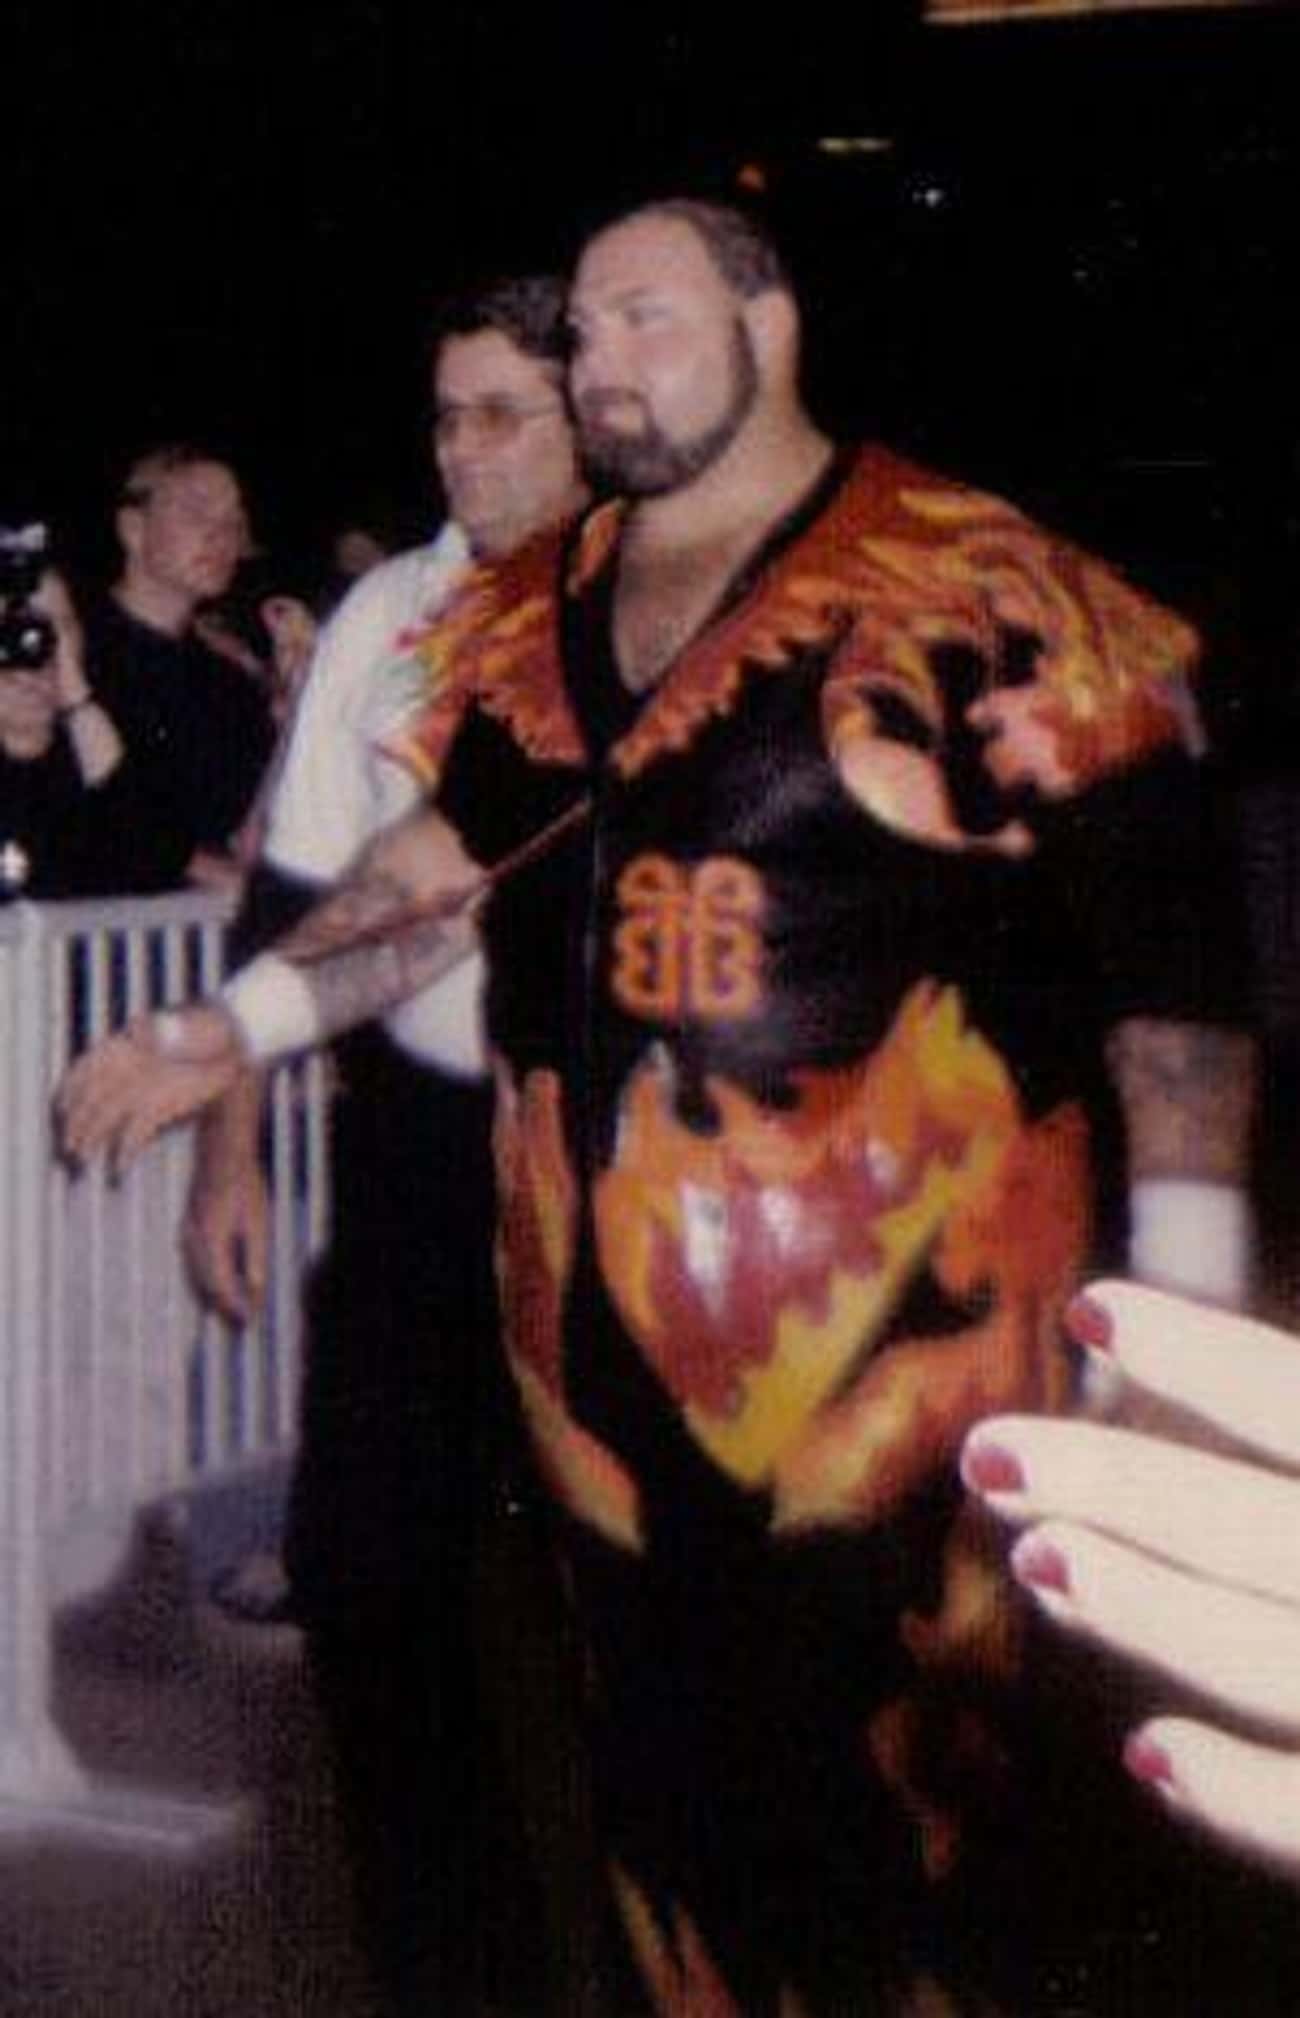 Bam Bam Bigelow Rushed Into A Fire To Save Children